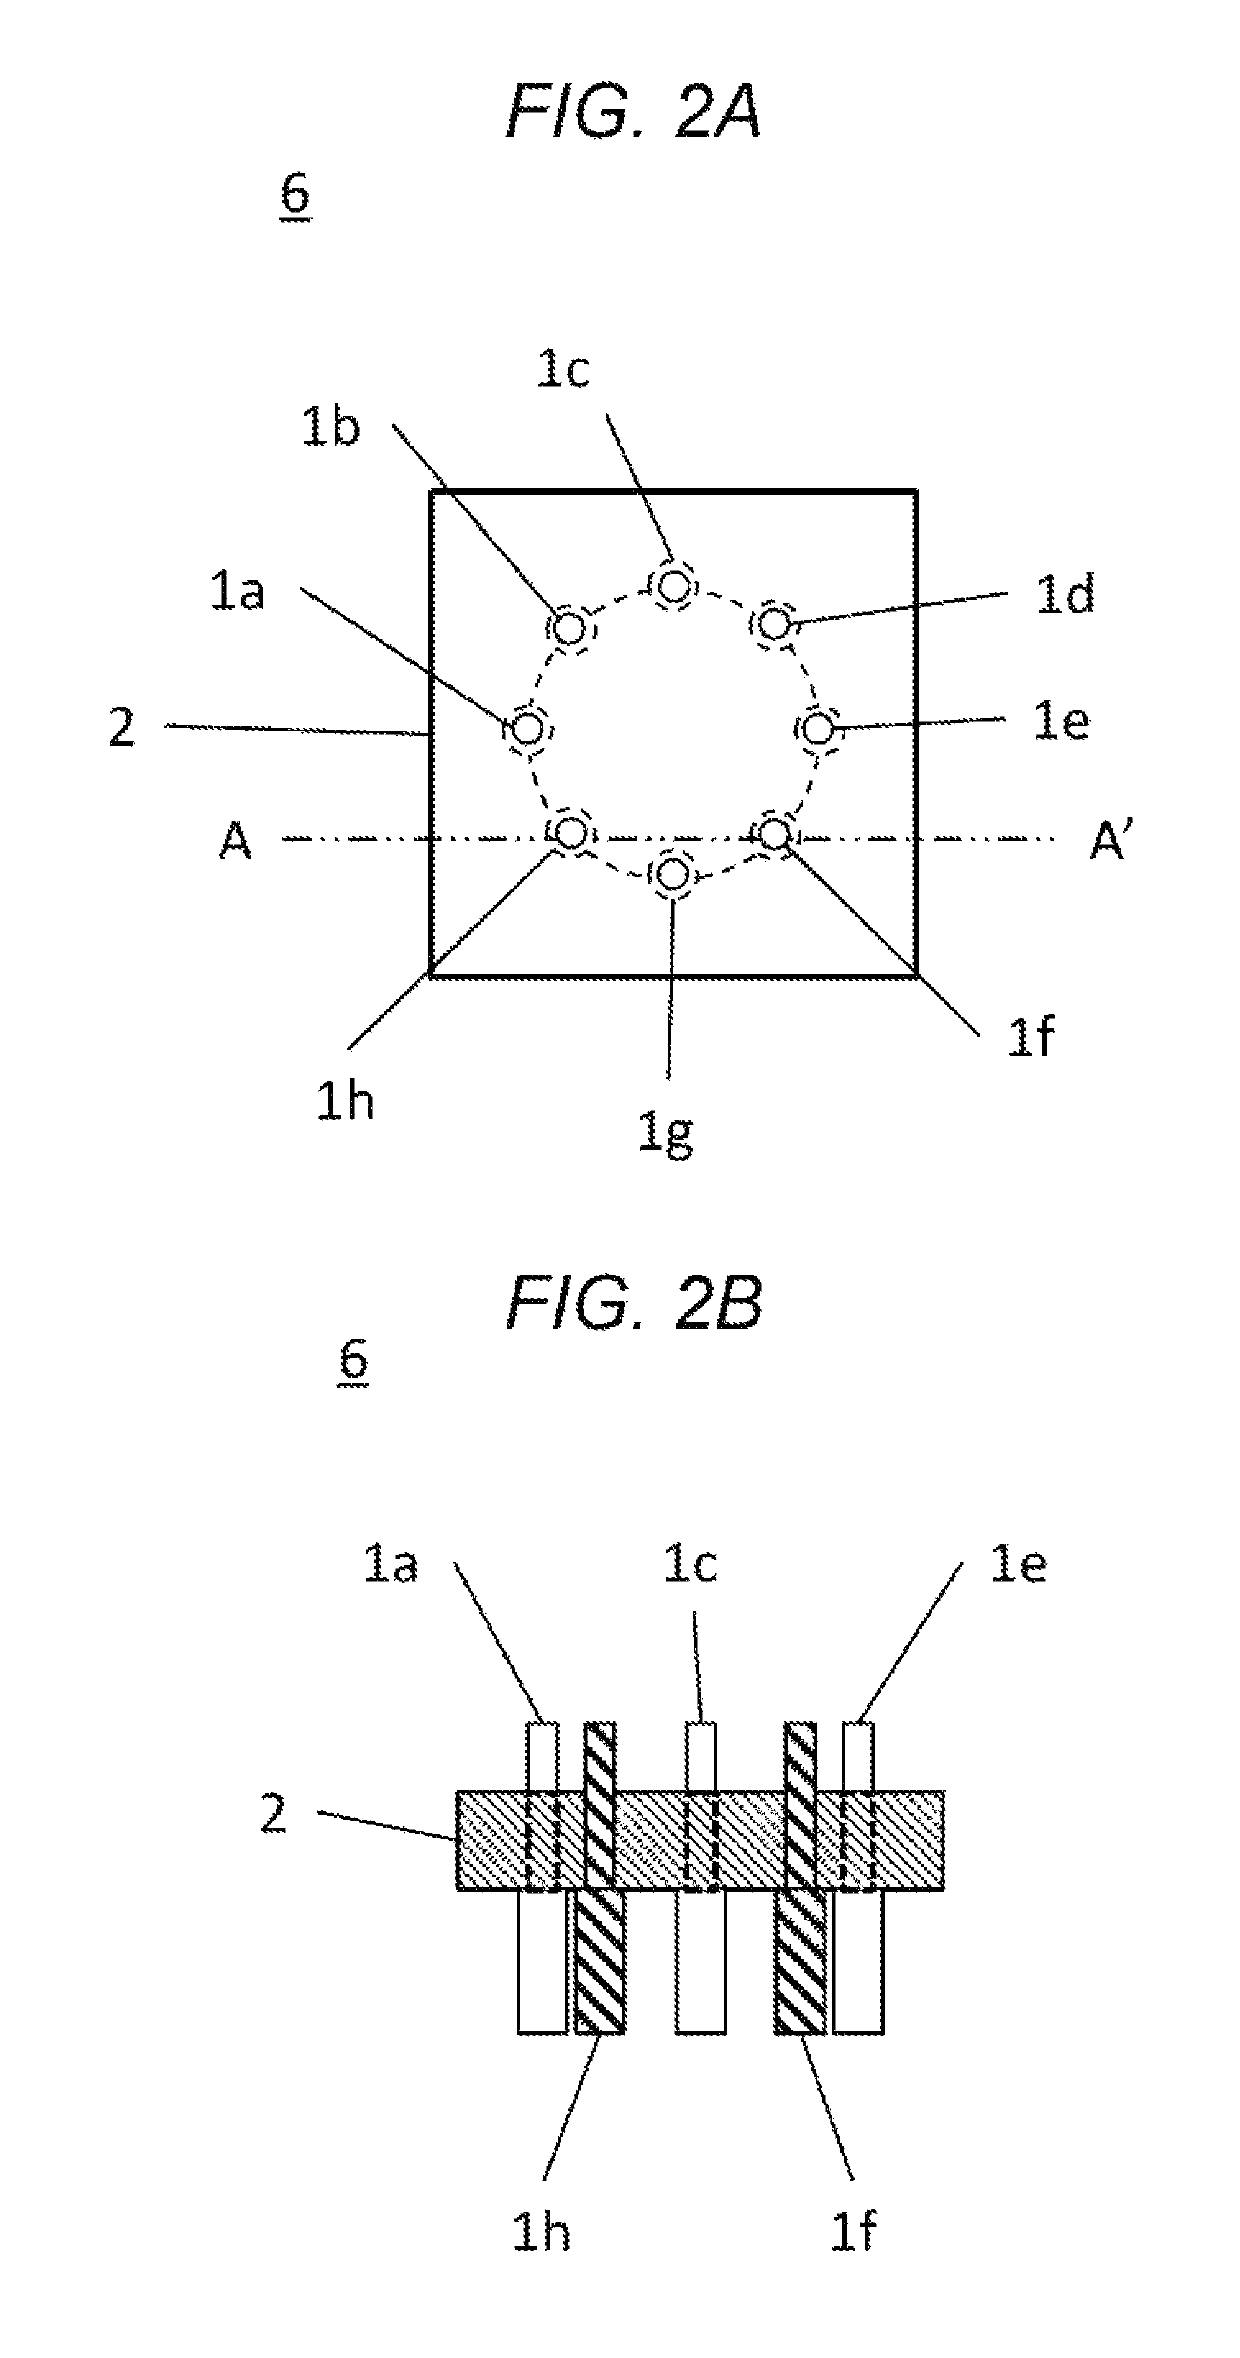 Resistance-measurement apparatus and method for measuring resistance of powdery materials